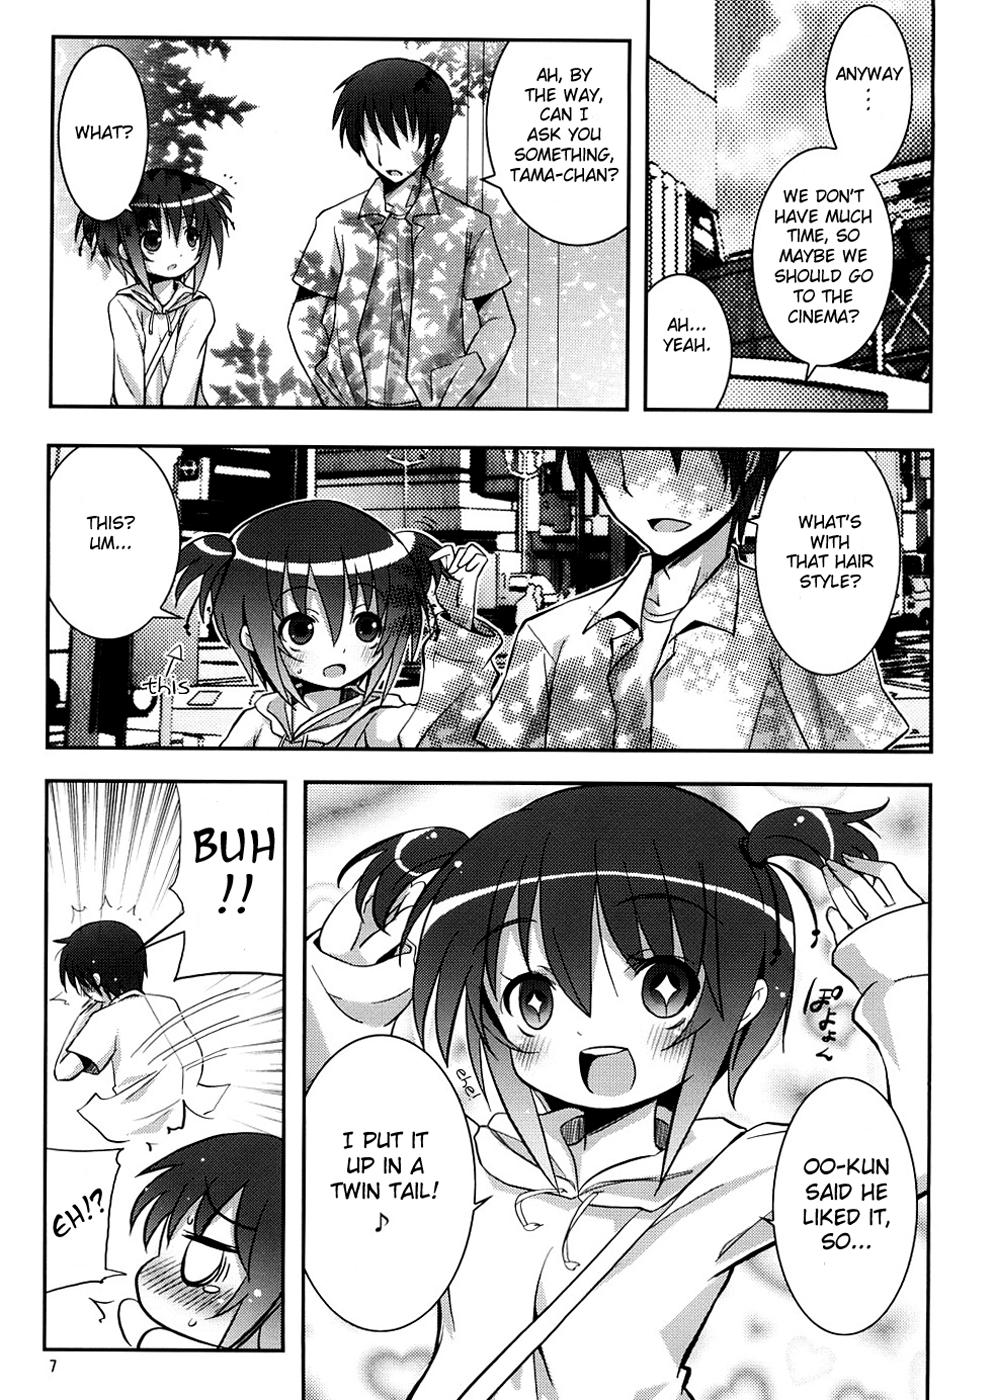 Pale Tama-chan to Date. - Bamboo blade Master - Page 6